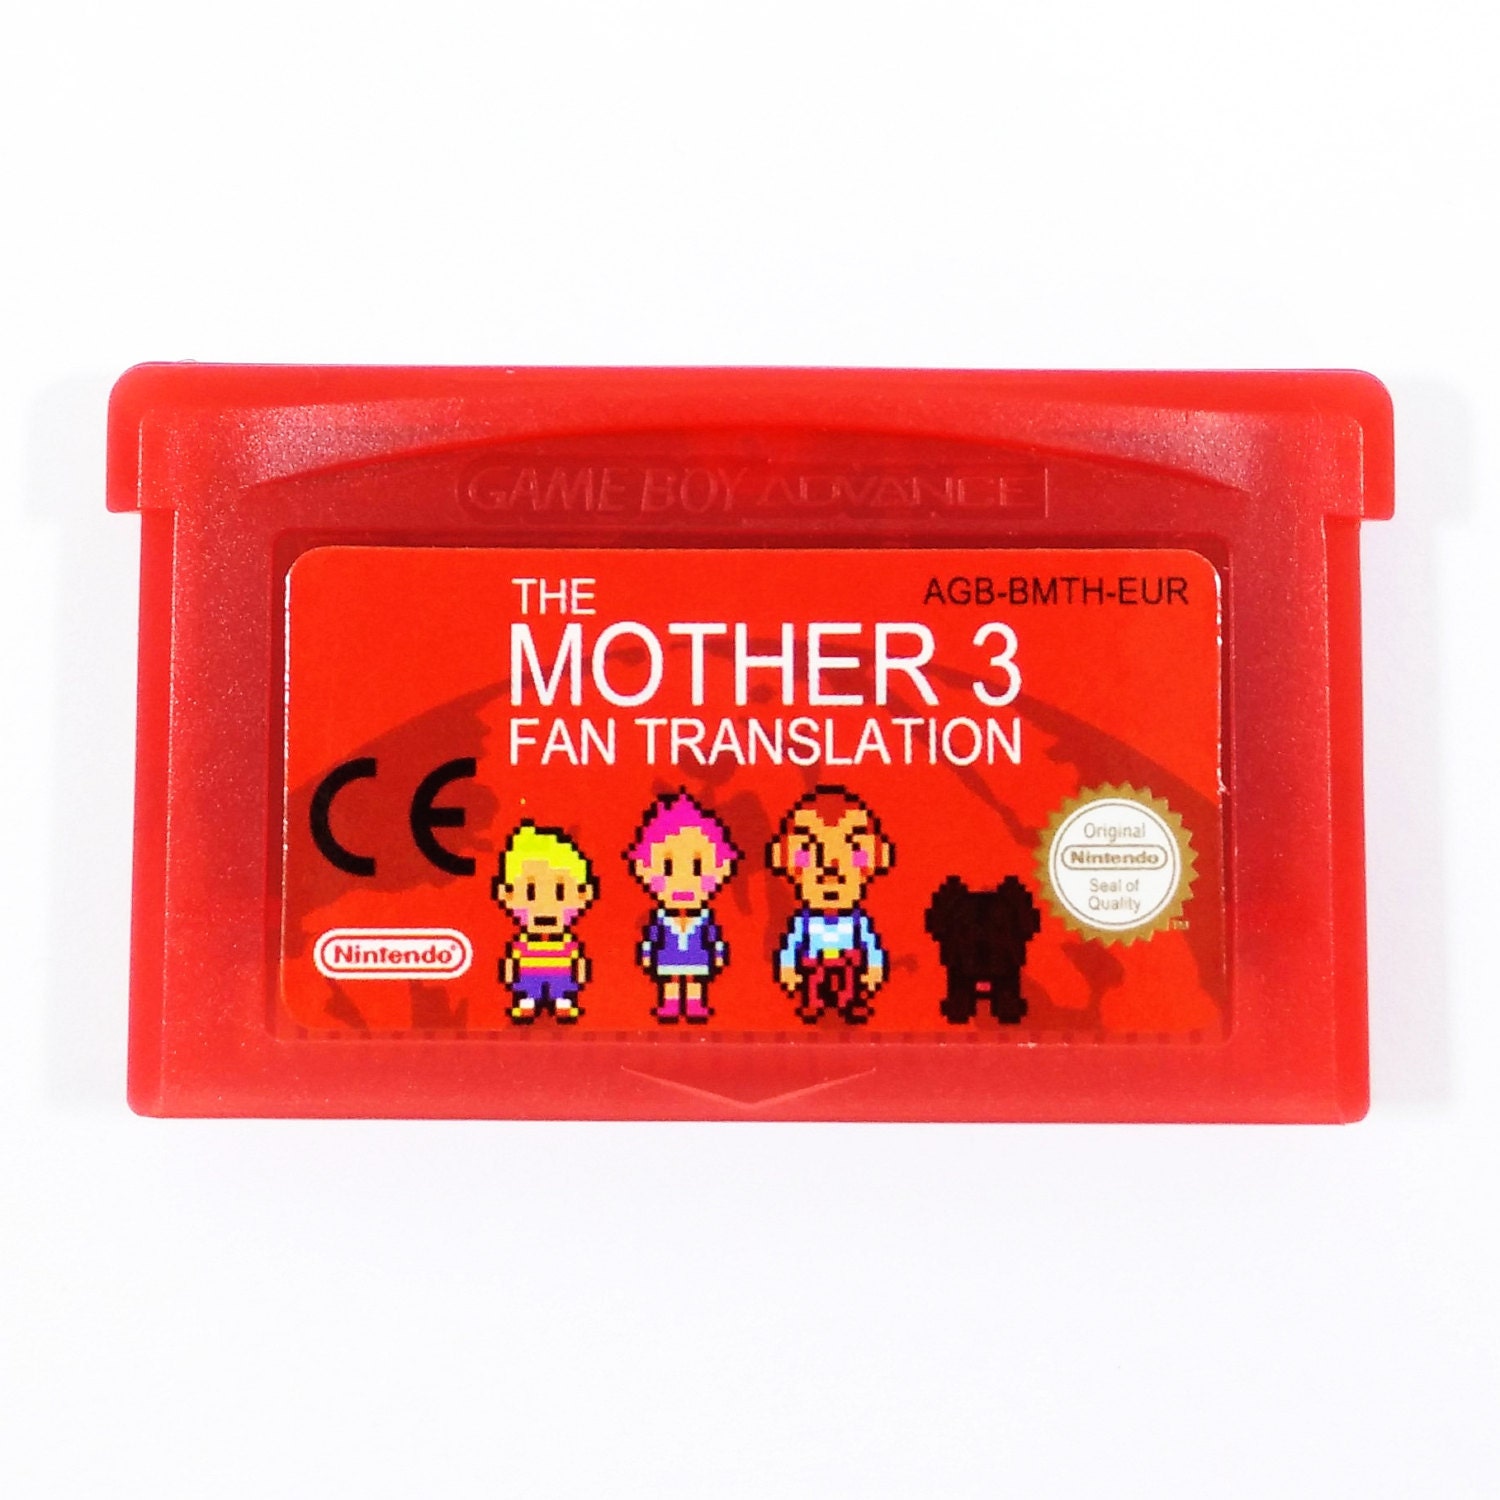 download earthbound cartridge